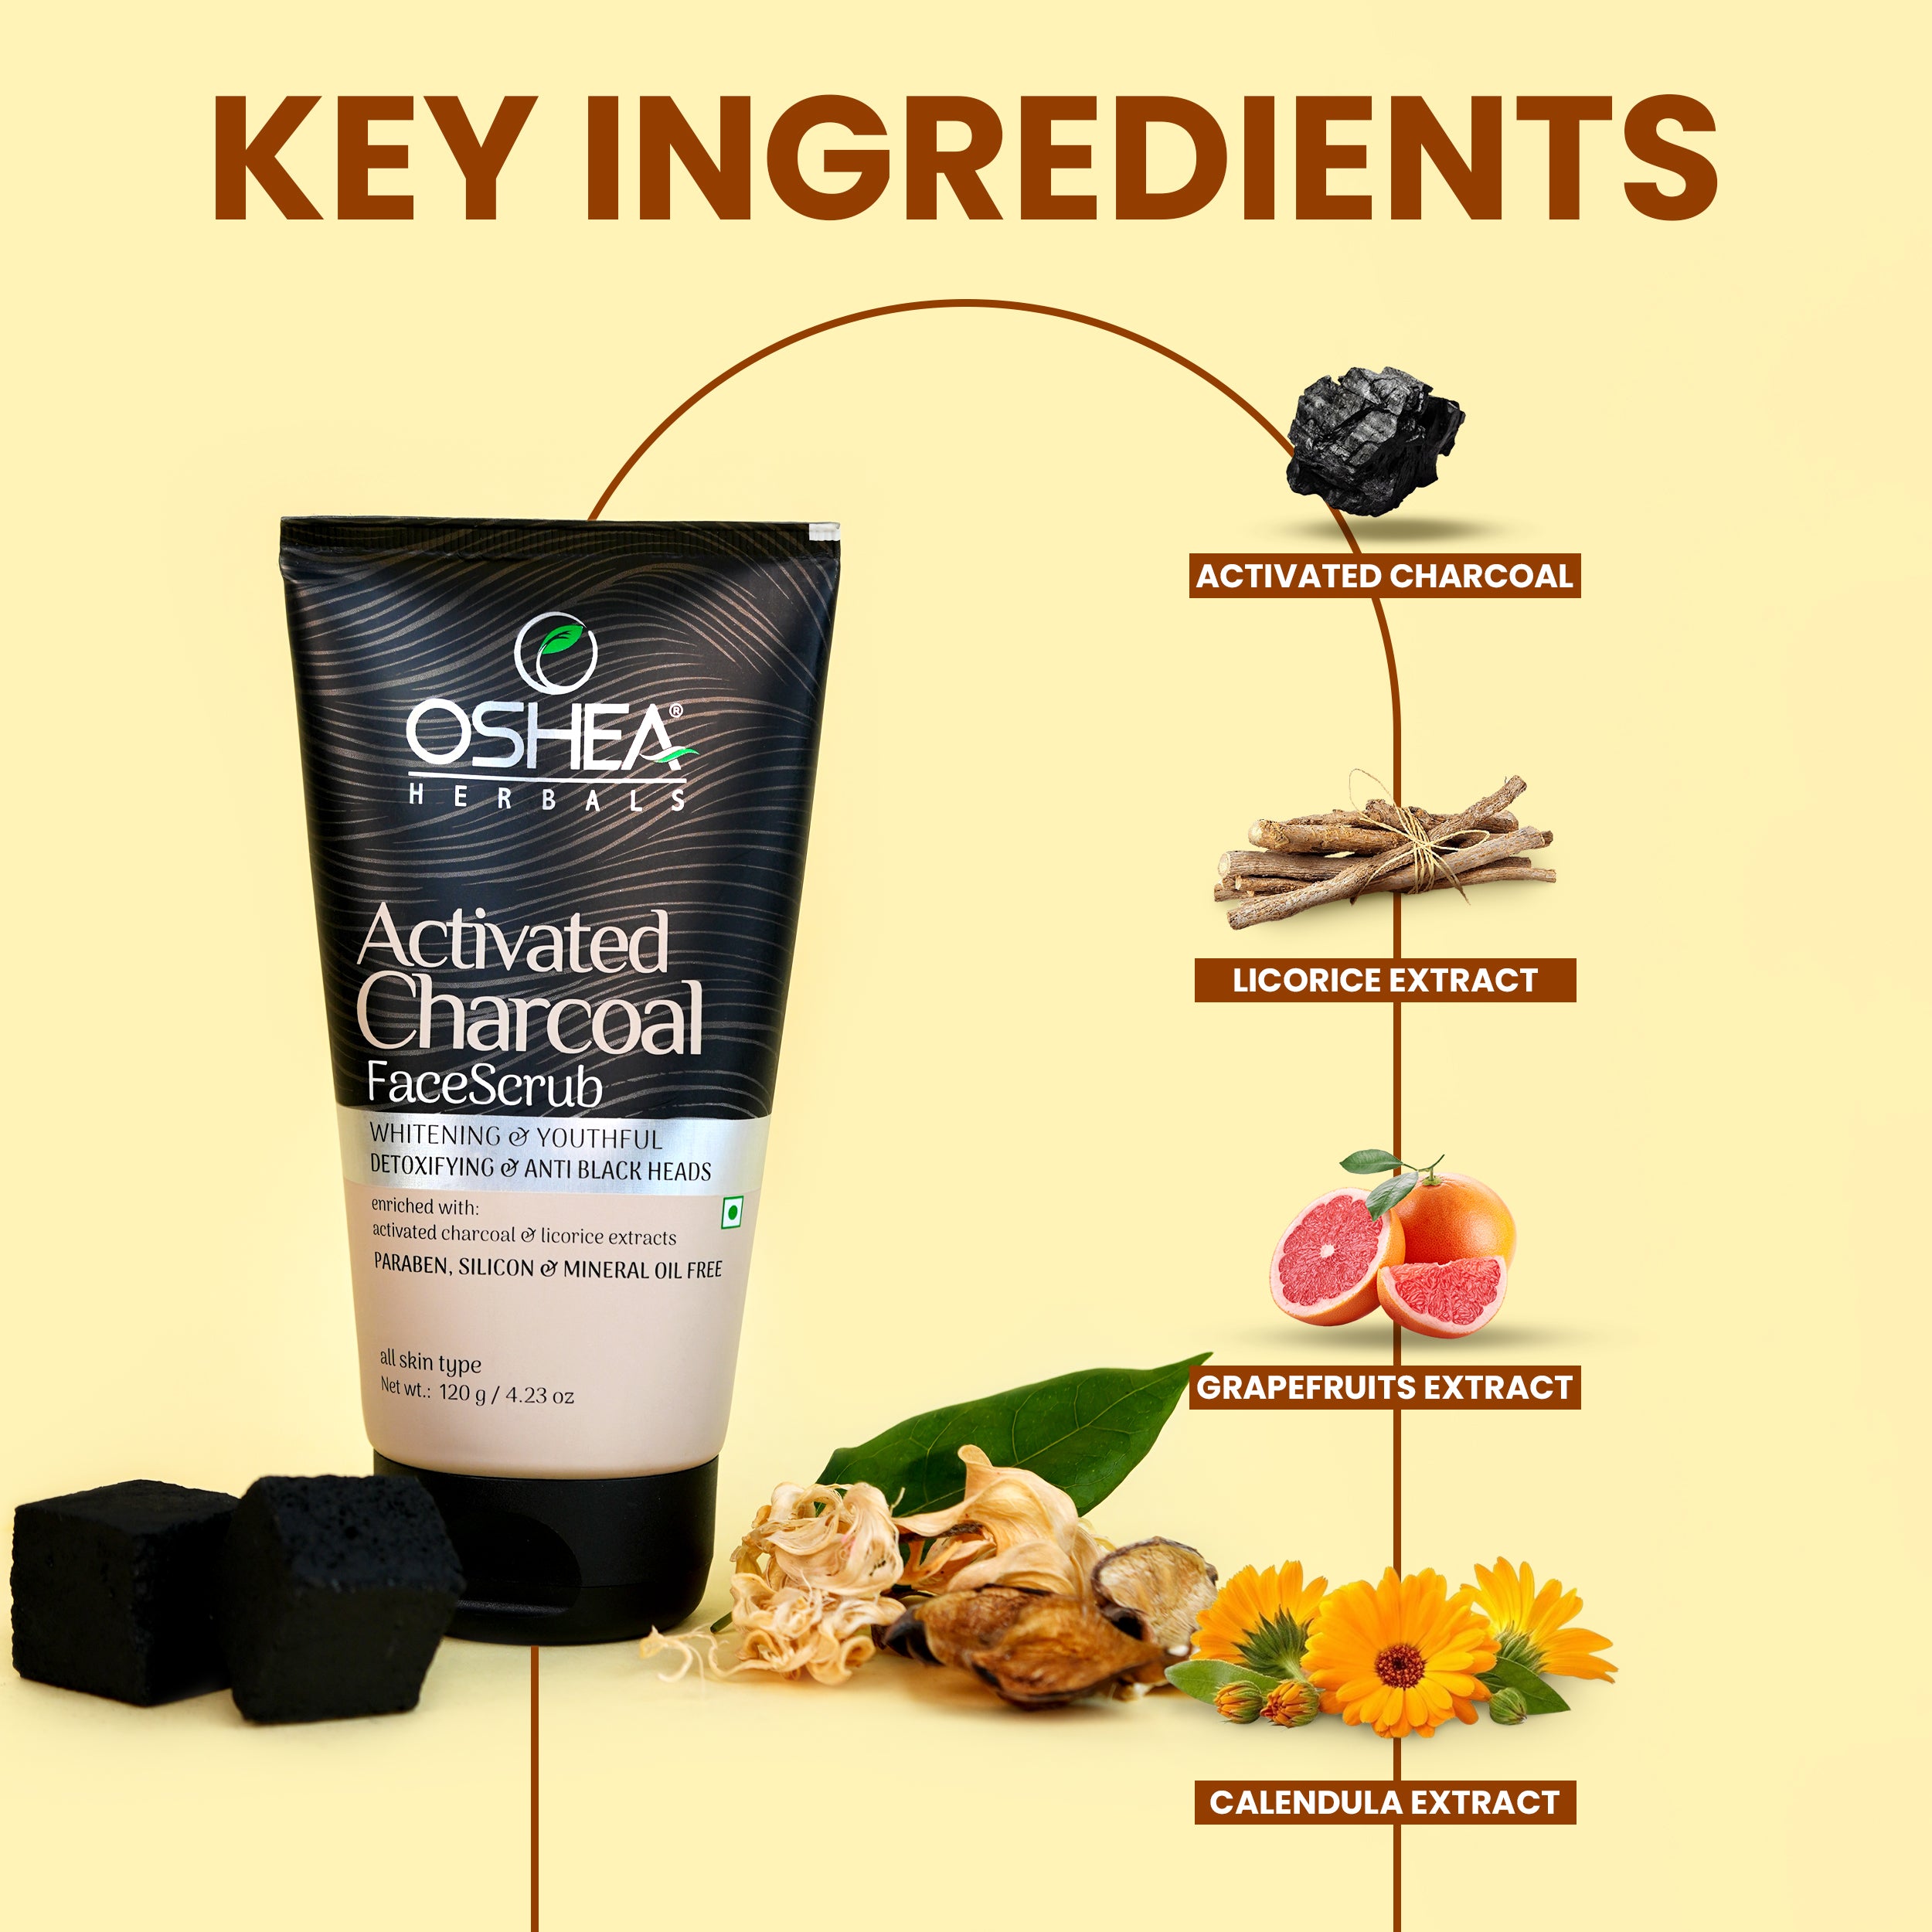 Key ingredients Activated Charcoal Face Scrub Oshea Herbals